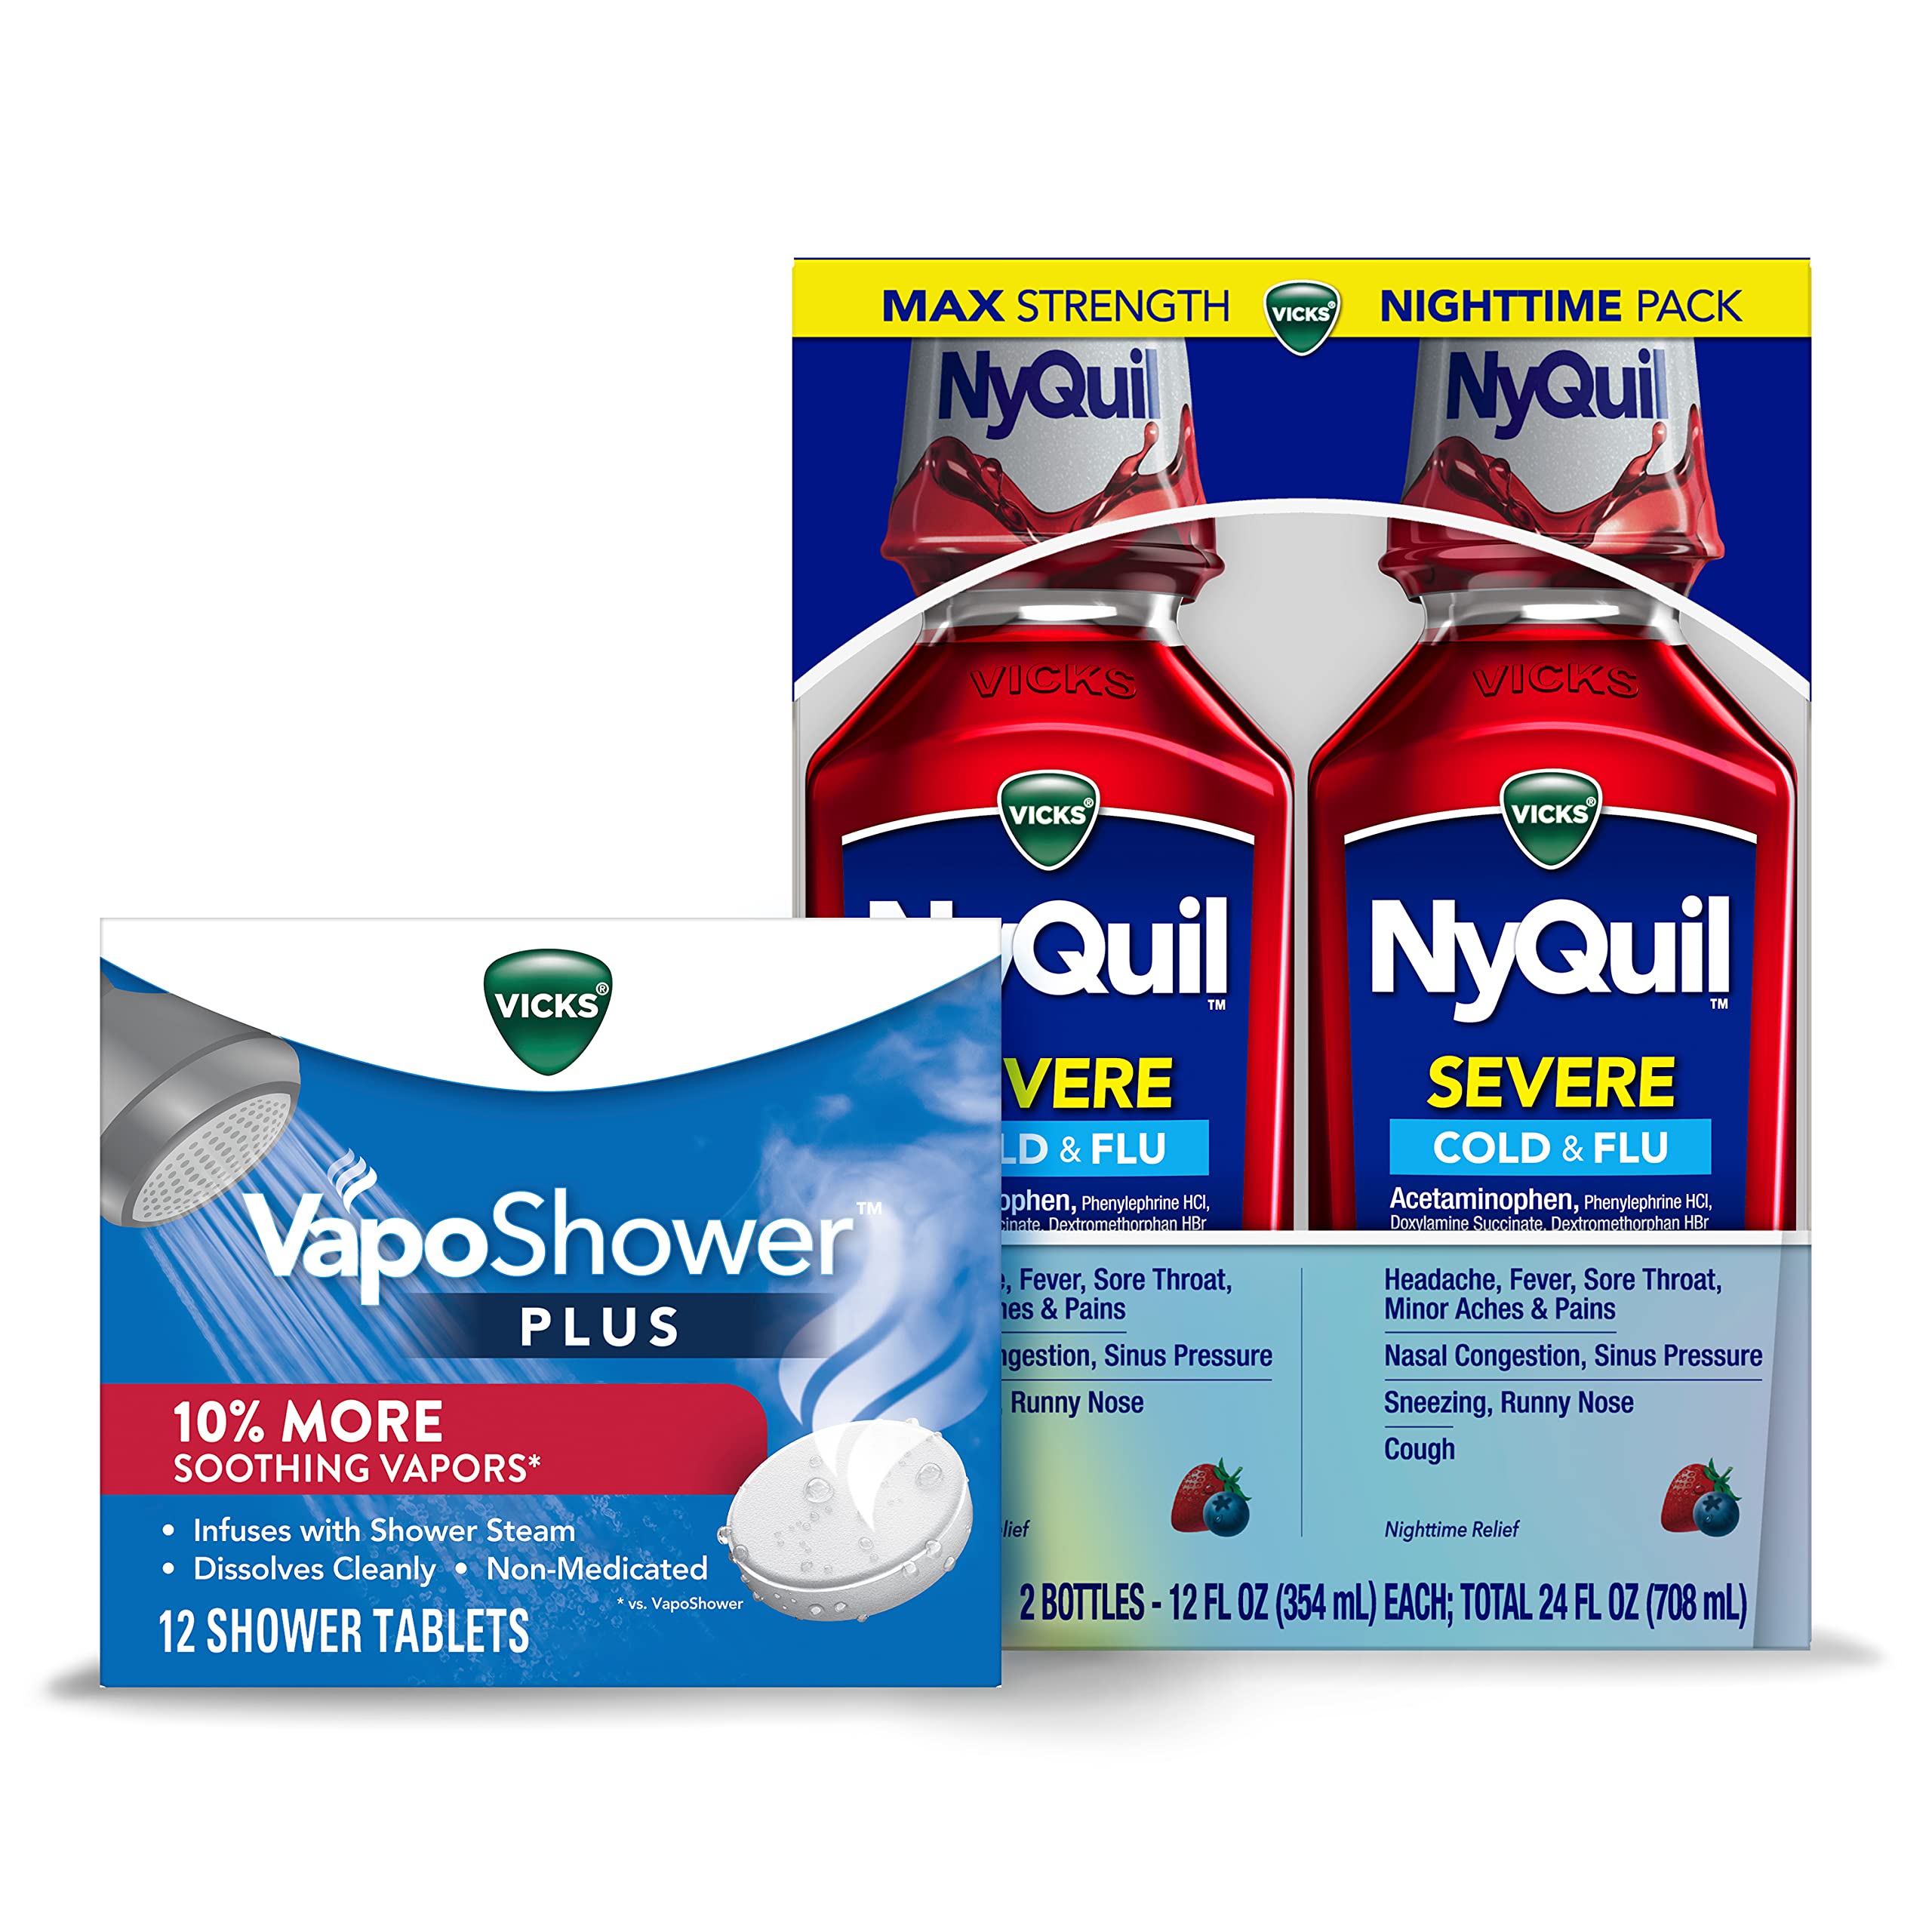 Vicks NyQuil Severe, Nighttime Relief of Cough, Cold & Flu Relief, Sore Throat, 2-12 FL OZ Bottles & Vicks VapoShower Plus, Shower Bomb Tablets, Strong Soothing Non-Medicated Vapors, 12 Tablets,